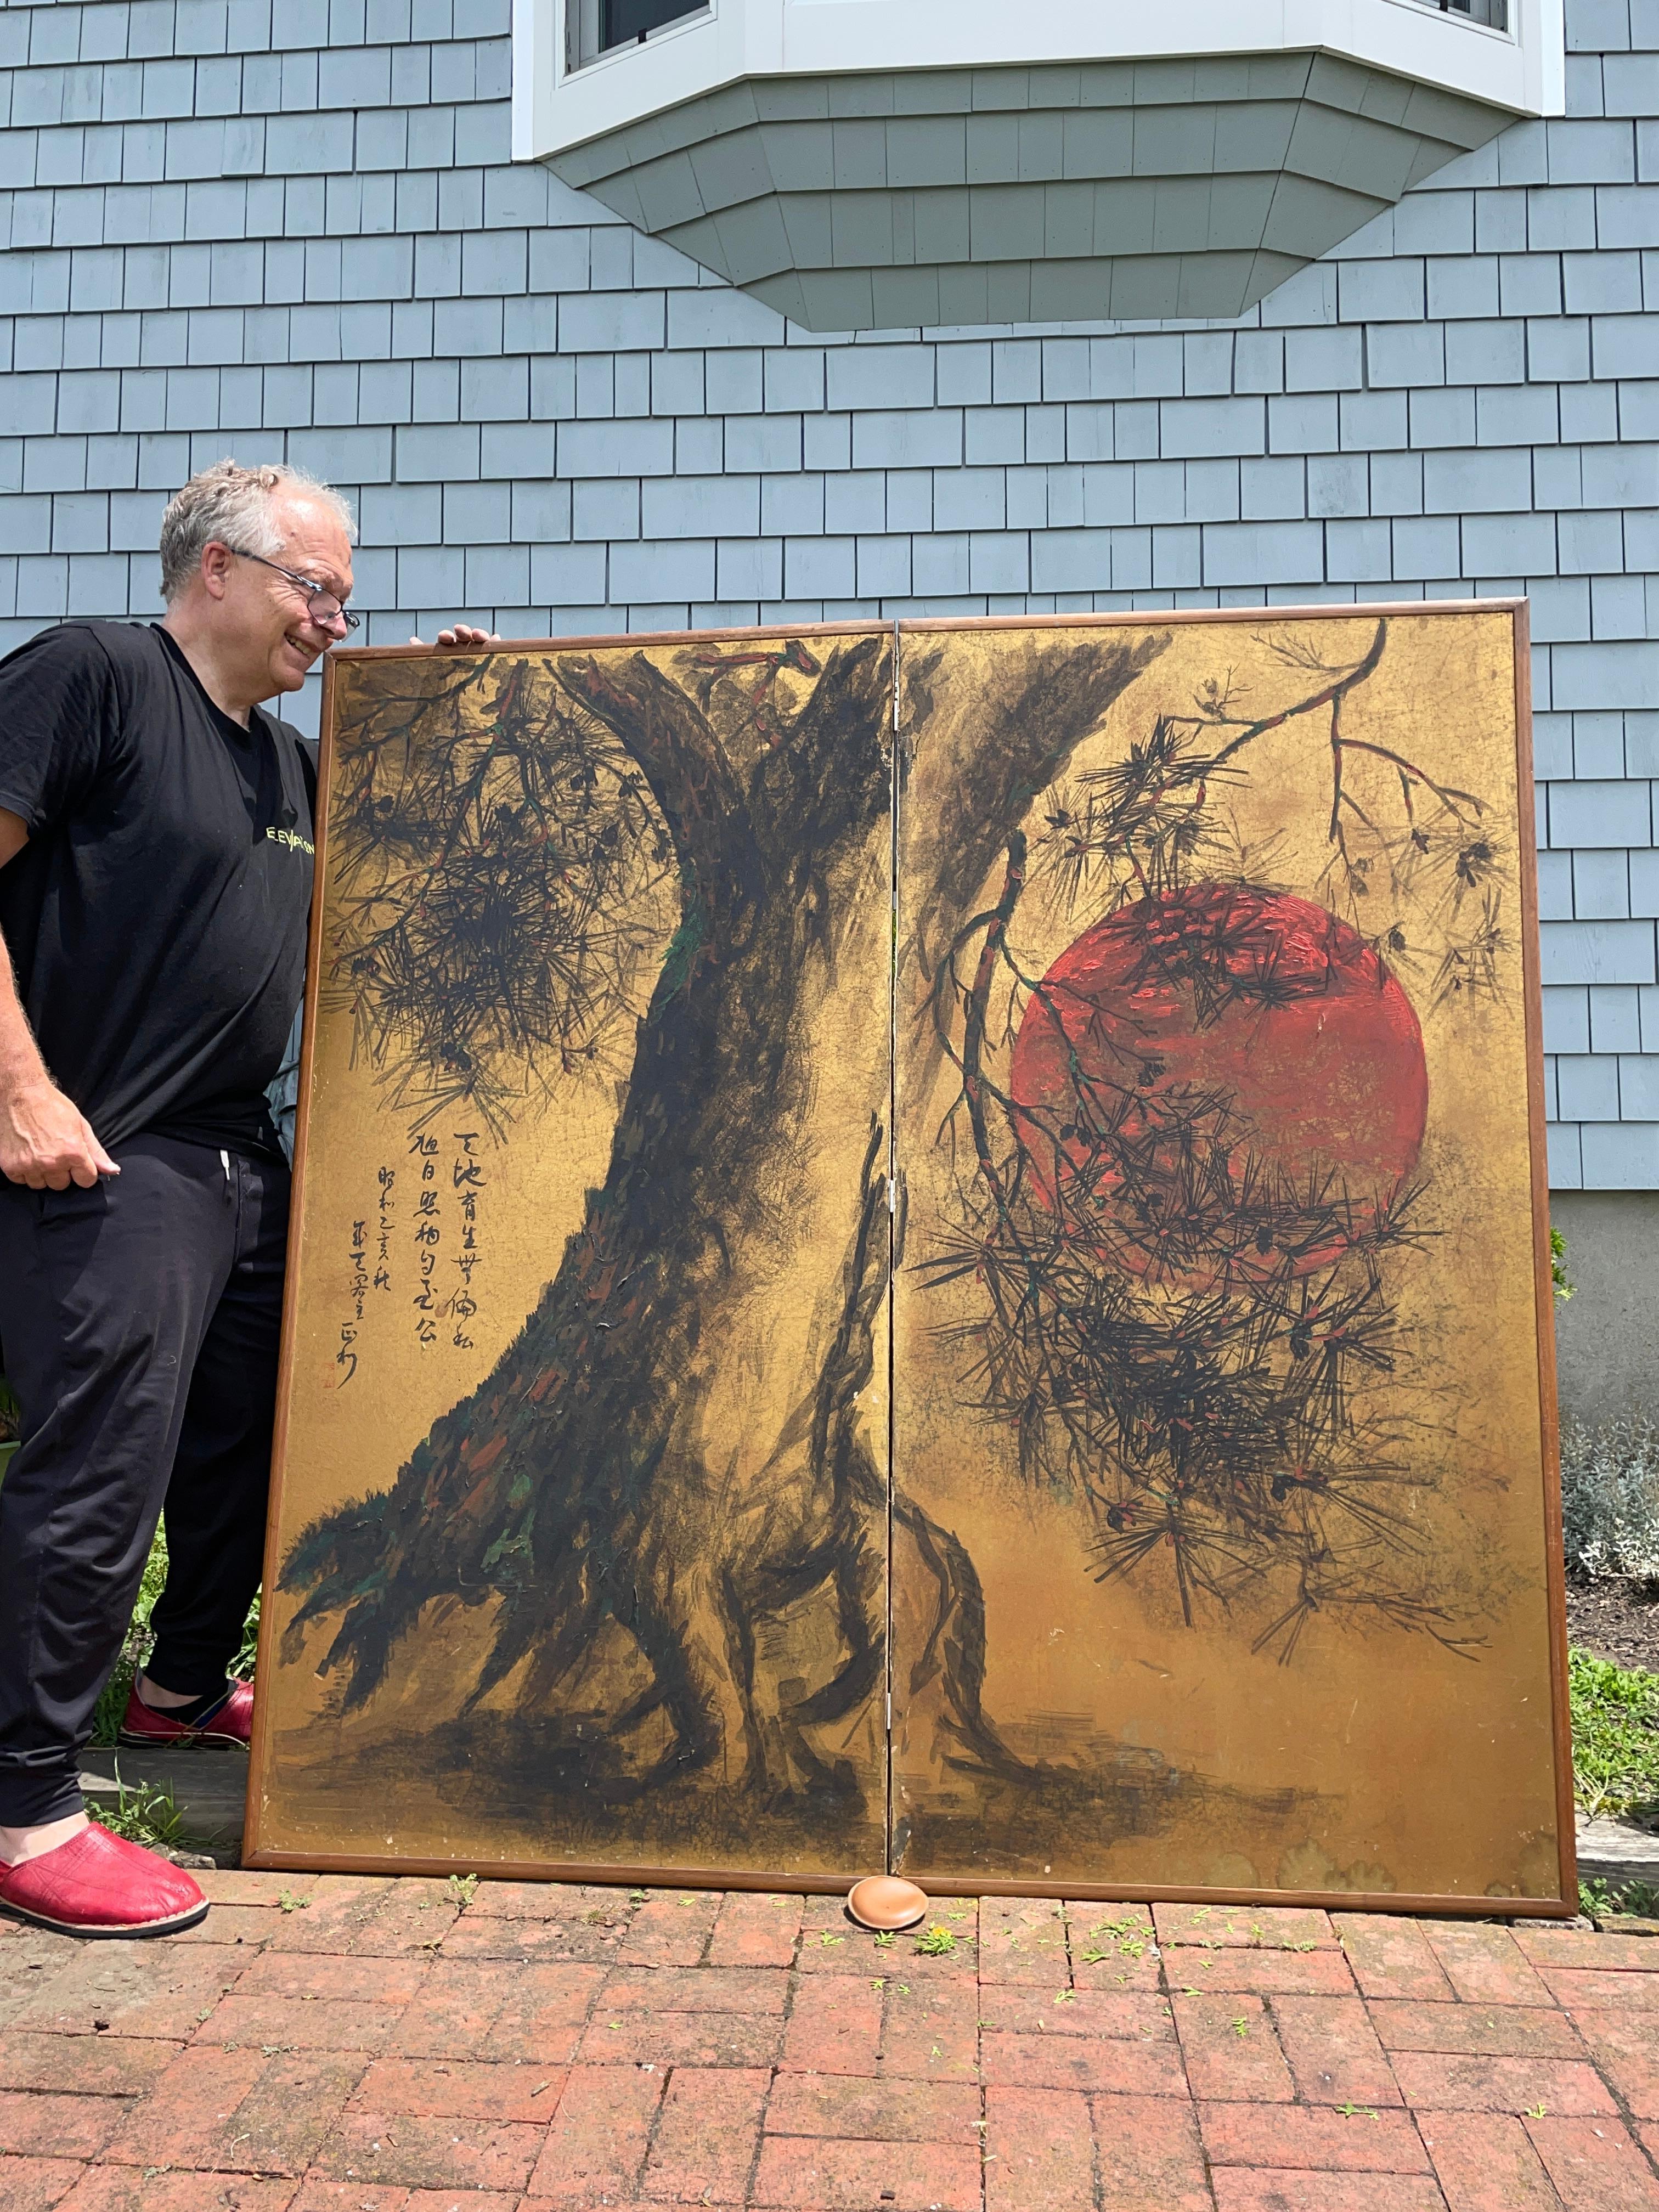 A rare depiction of a brilliant red moon shadowed by a single pine tree - a Japanese antique hand painted two-panel folding screen byobu form artistically conceived in primary red andblack colors on a gold ground and in a medium scale size.